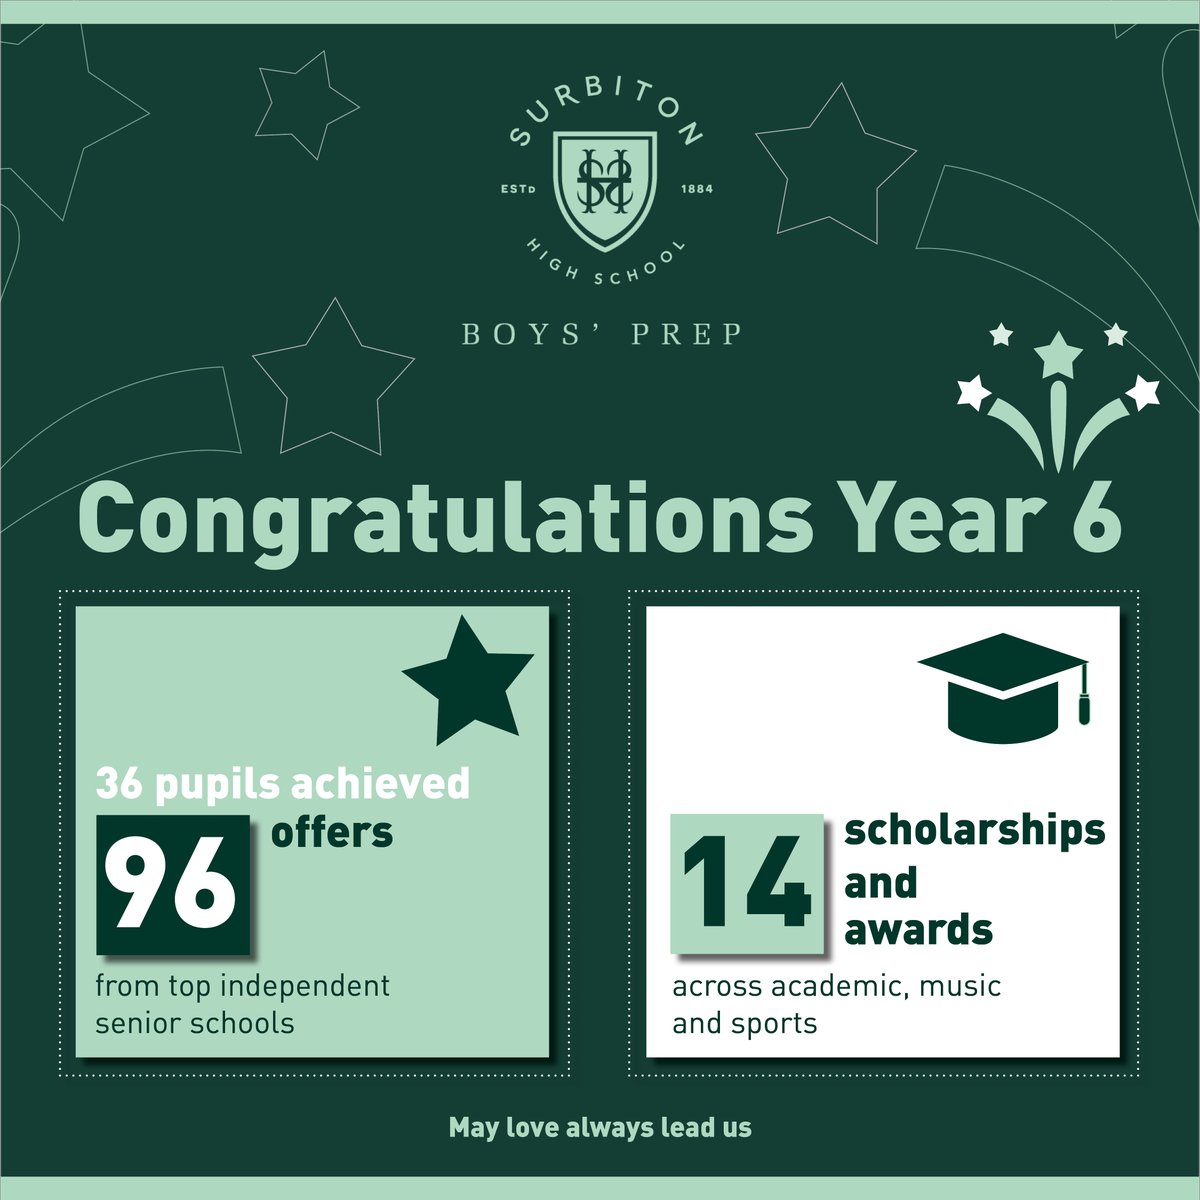 Our Year 6 boys have exhibited dedication towards their 11+ exams and have reaped the rewards, securing 14 scholarships and 96 offers so far, distributed among the 36 boys. Congratulations boys!👏 ⬇️ bit.ly/3TNeYM4 #UnmistakablySurbiton #EducationUnleashed #11Plus